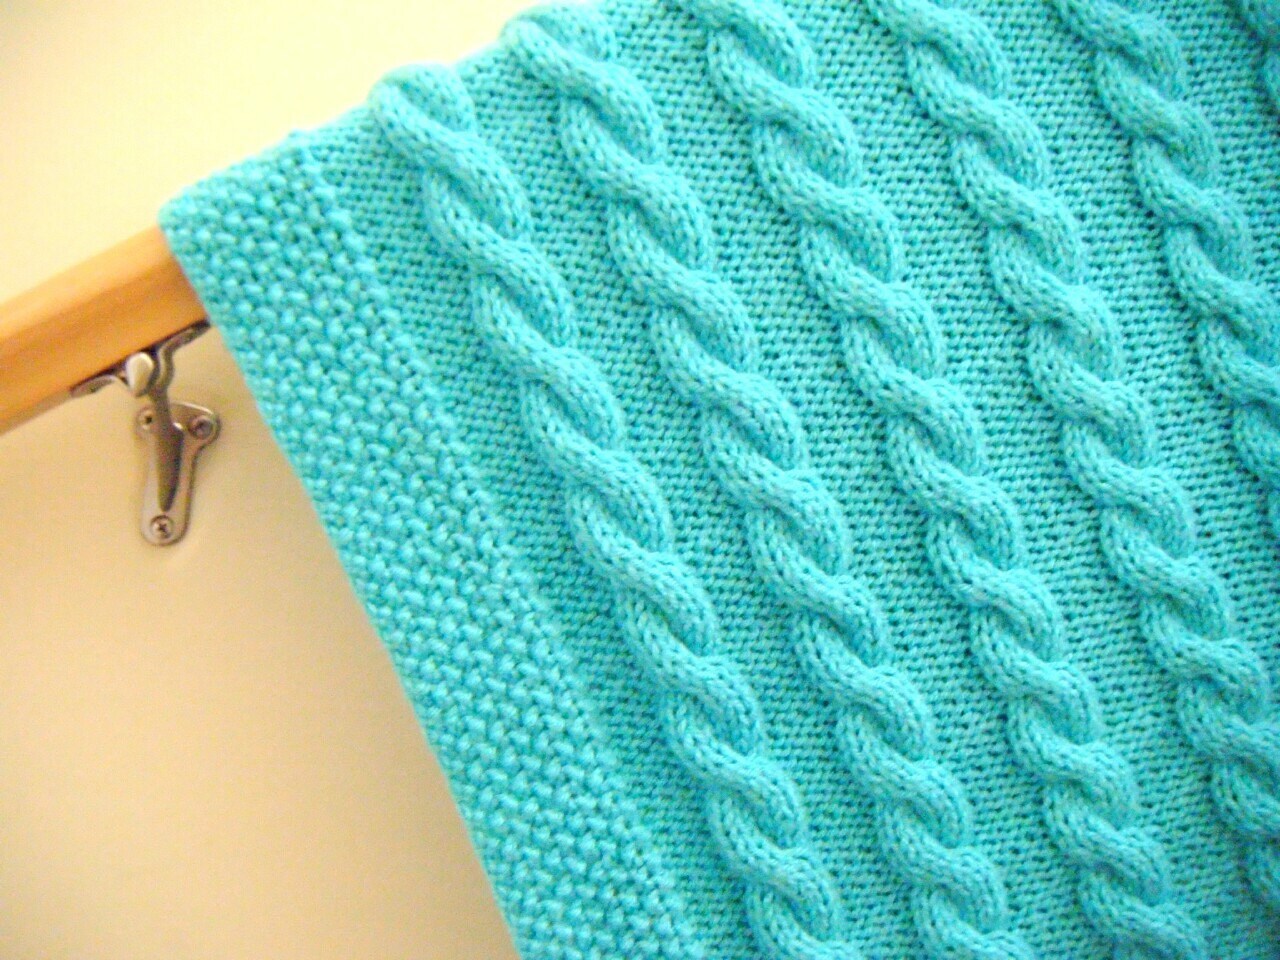 Baby blanket knitted cable pattern very soft turquoise